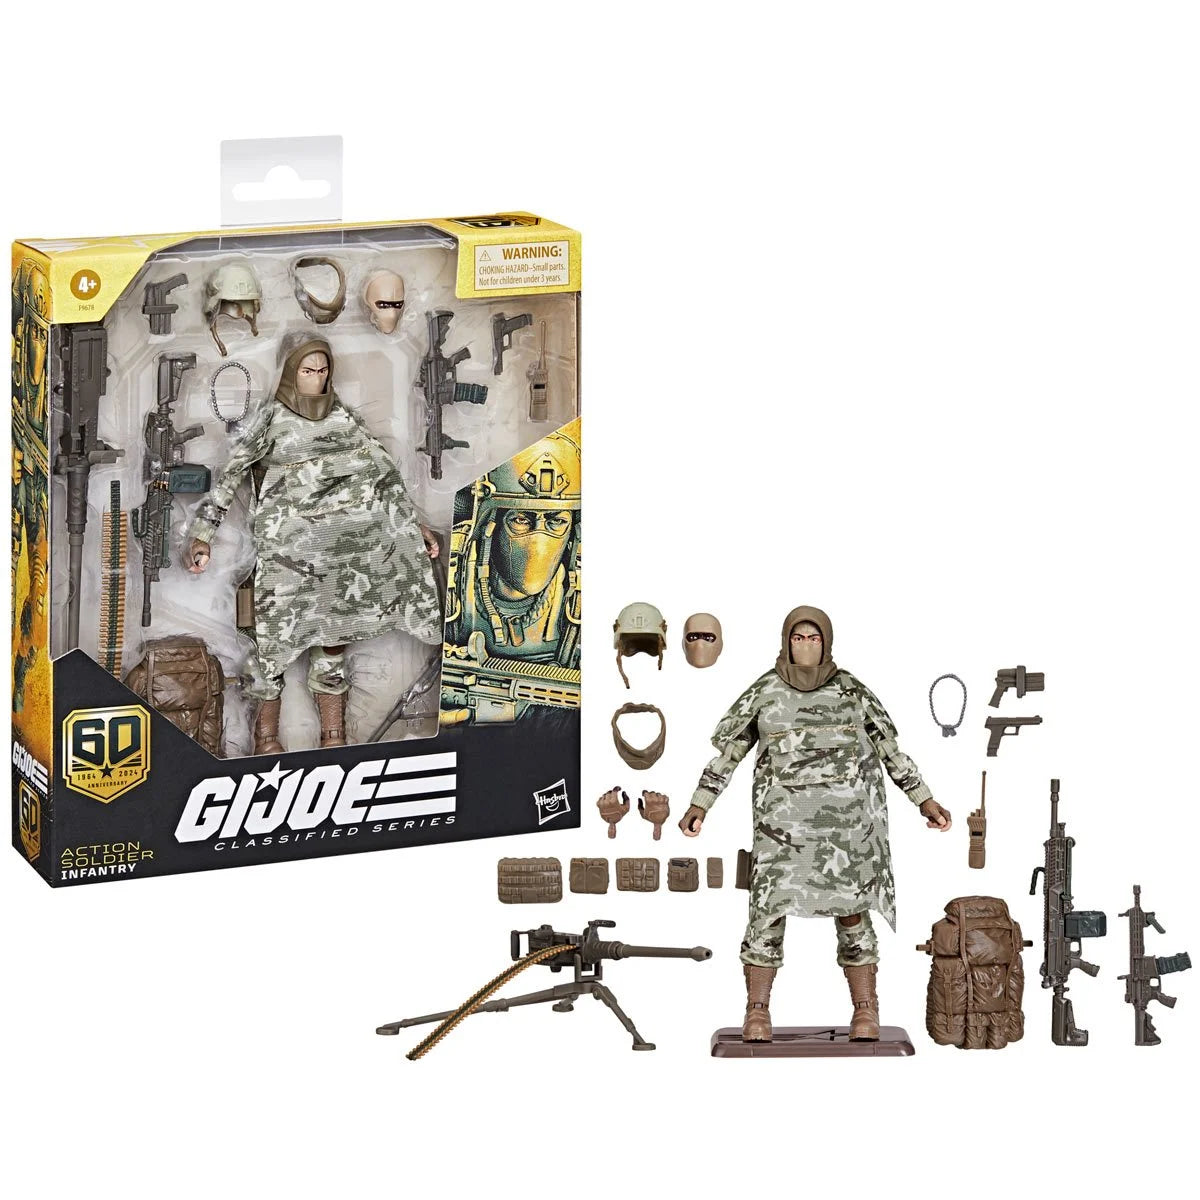 Product News-Second Item of the Soldier Figure Series: New Fourth